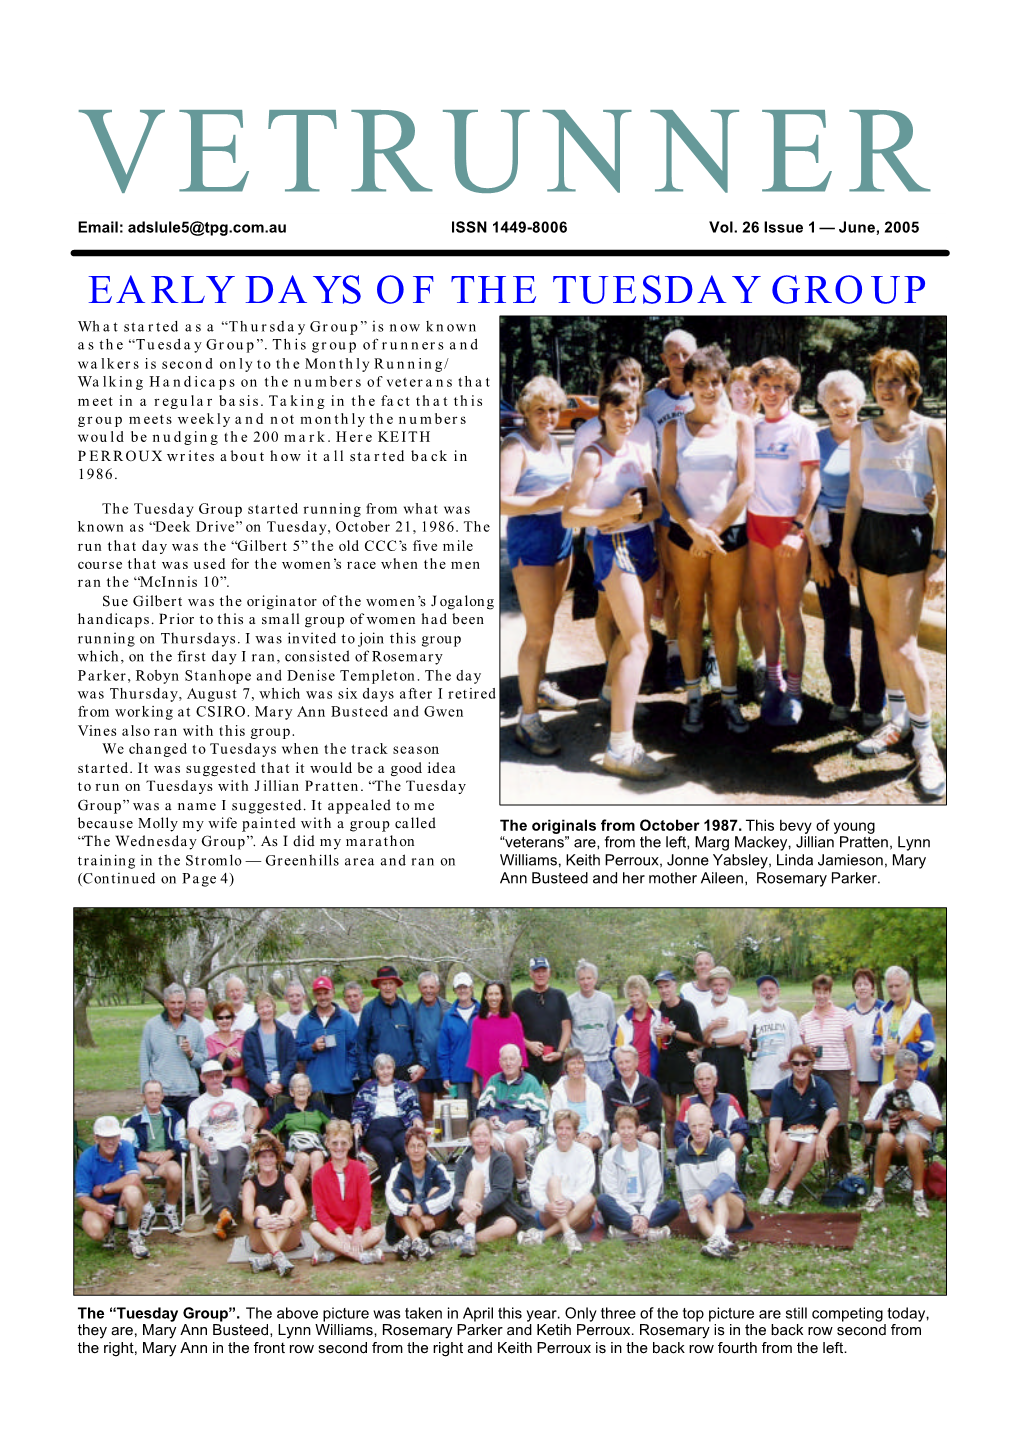 EARLY DAYS of the TUESDAY GROUP What Started As a “Thursday Group” Is Now Known As the “Tuesday Group”